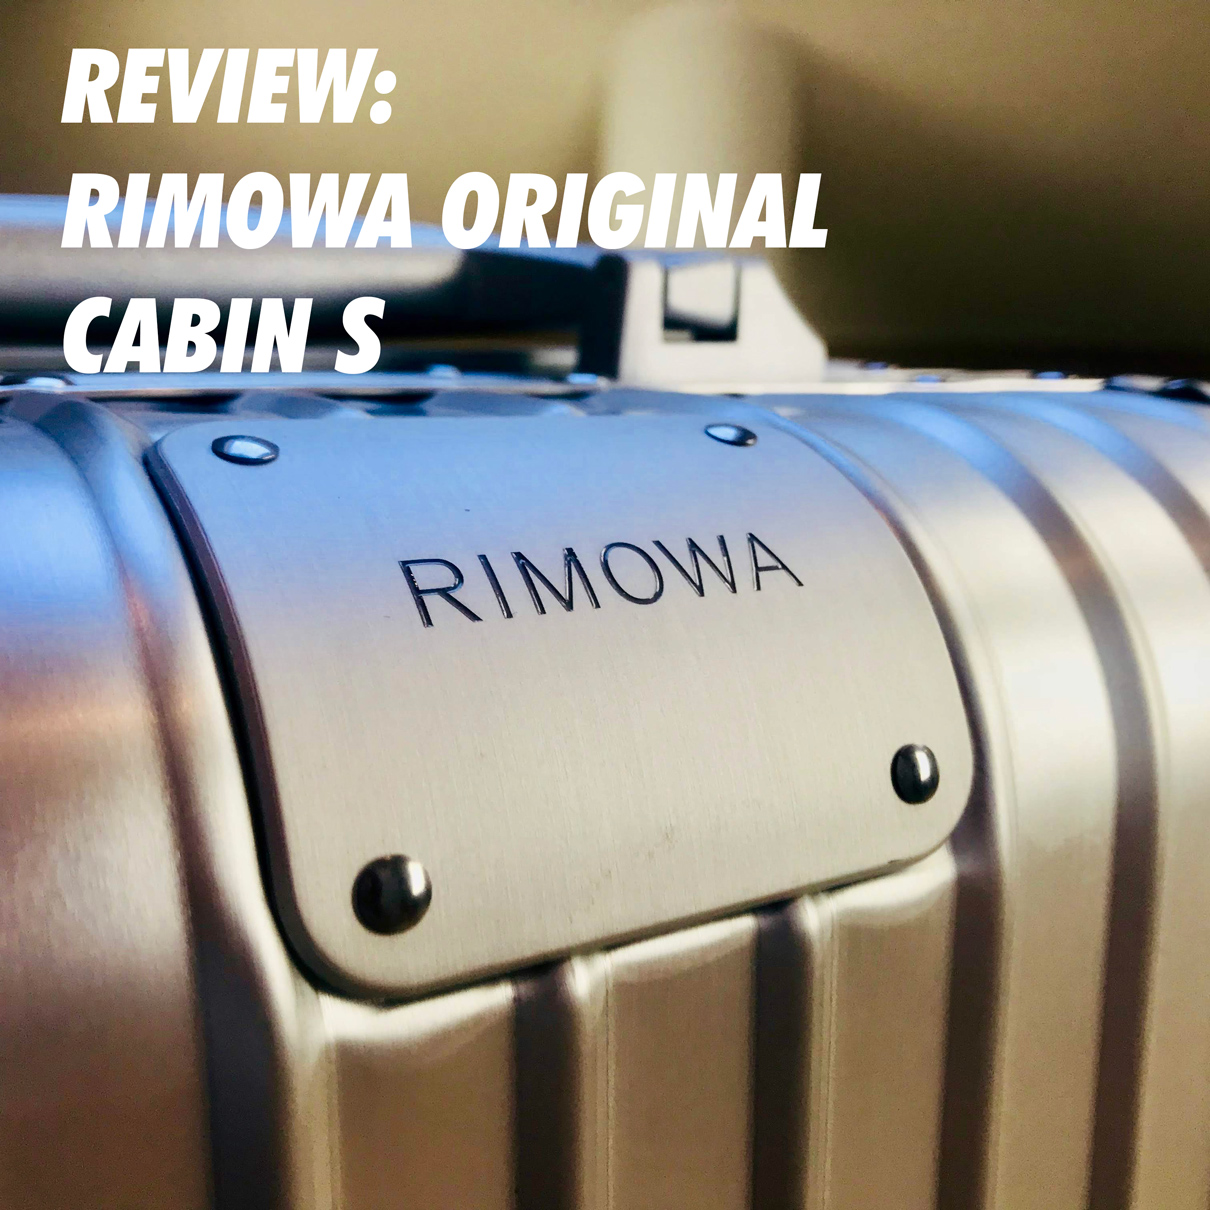 Product review of the Rimowa Original Cabin S